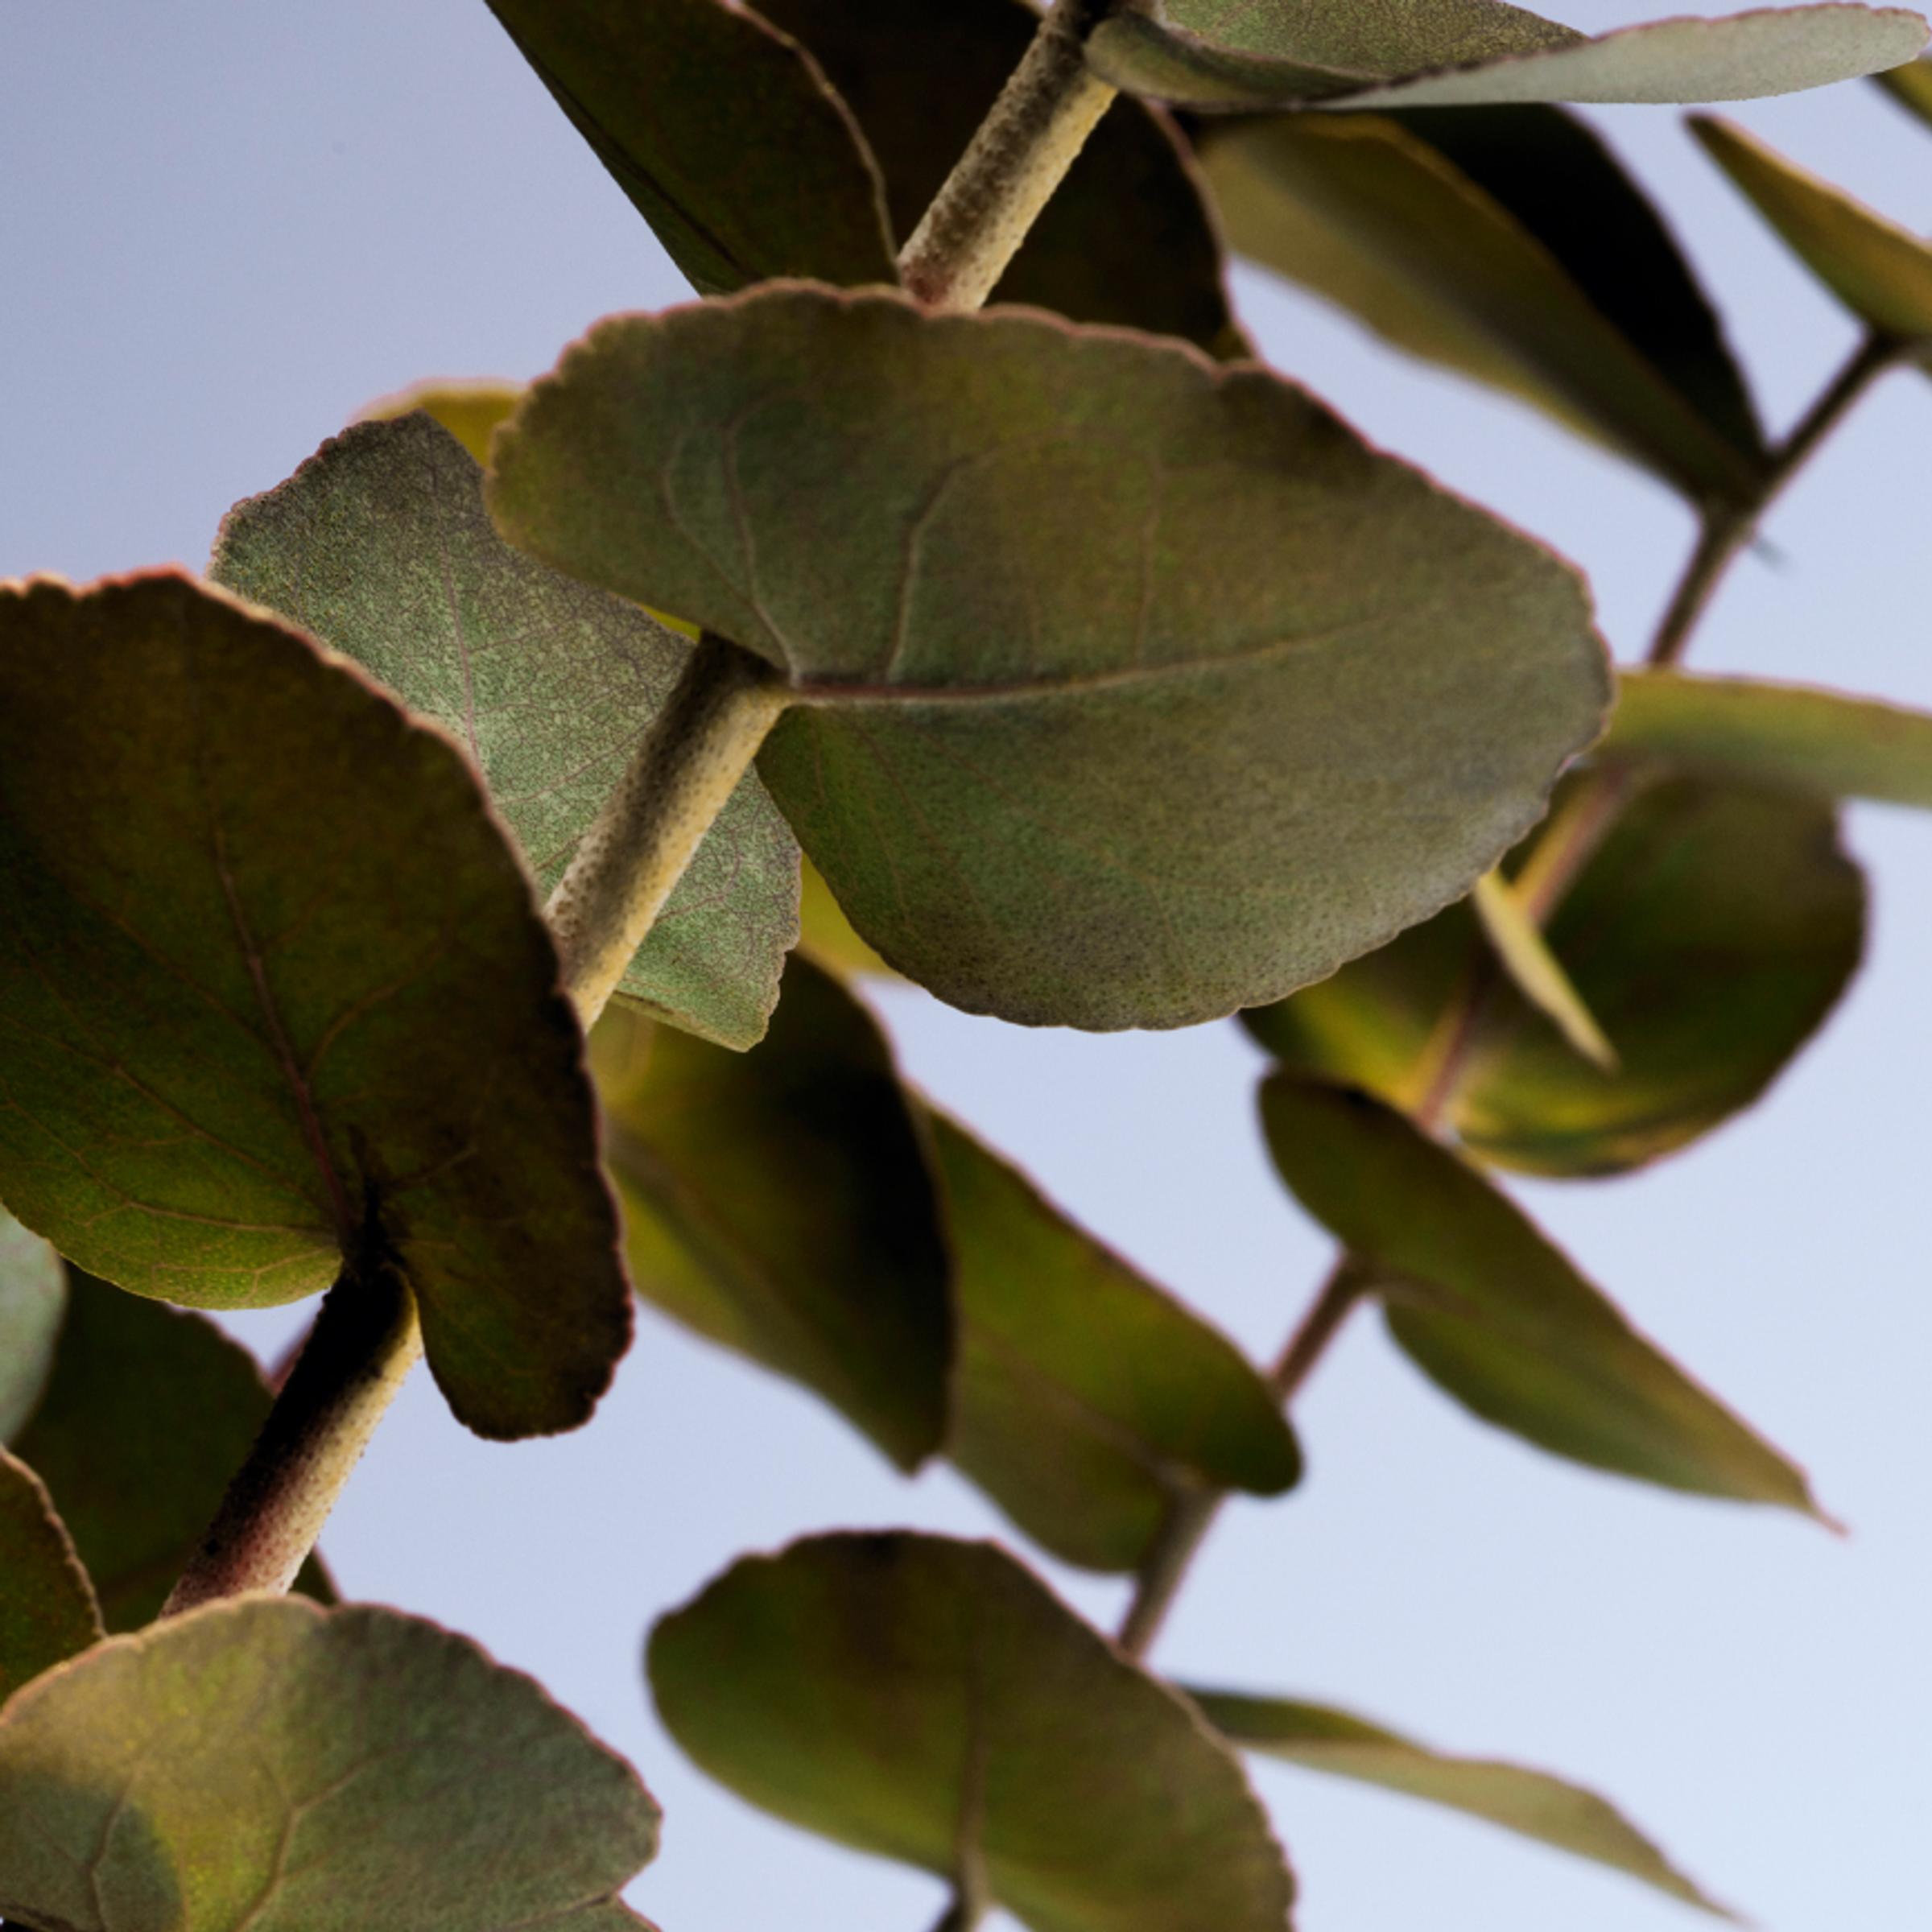 A few branches of green eucalyptus are shown against a light blue backdrop.